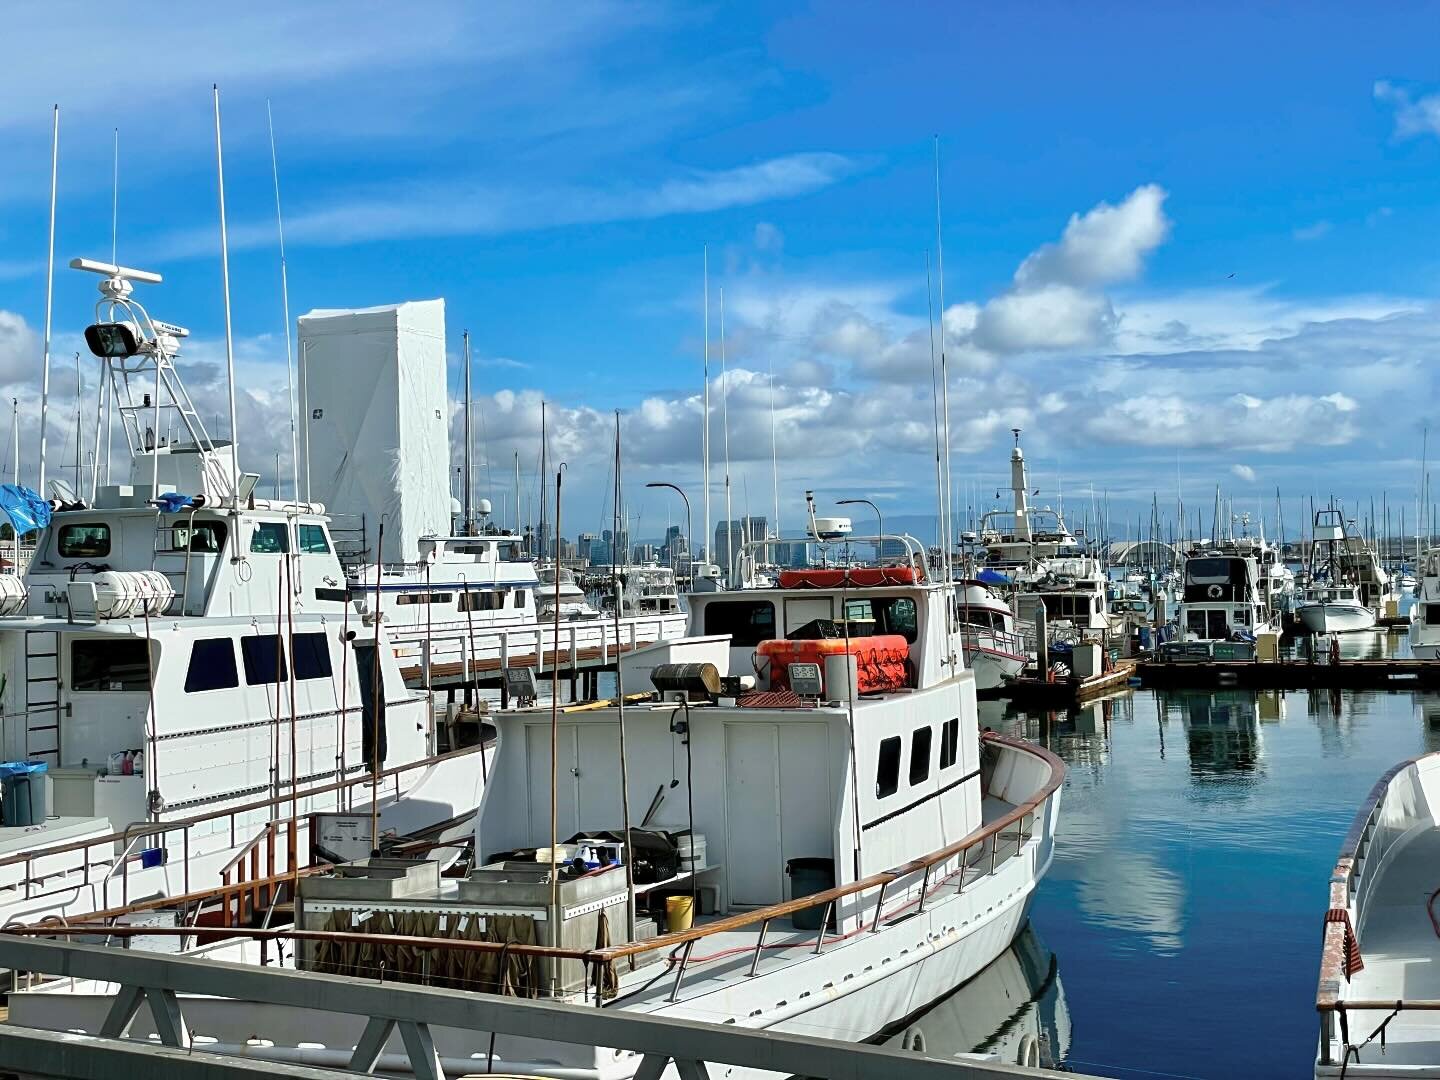 Went down to #sandiego harbor to buy the freshest #fish and #seafood for our #feastofthesevenfishes #christmas #weekend at #tunaville #market, a fish market by #localsandiego #fisherman.
What&rsquo;s on the menu? #calamari #scallops #crabcakes #smoke